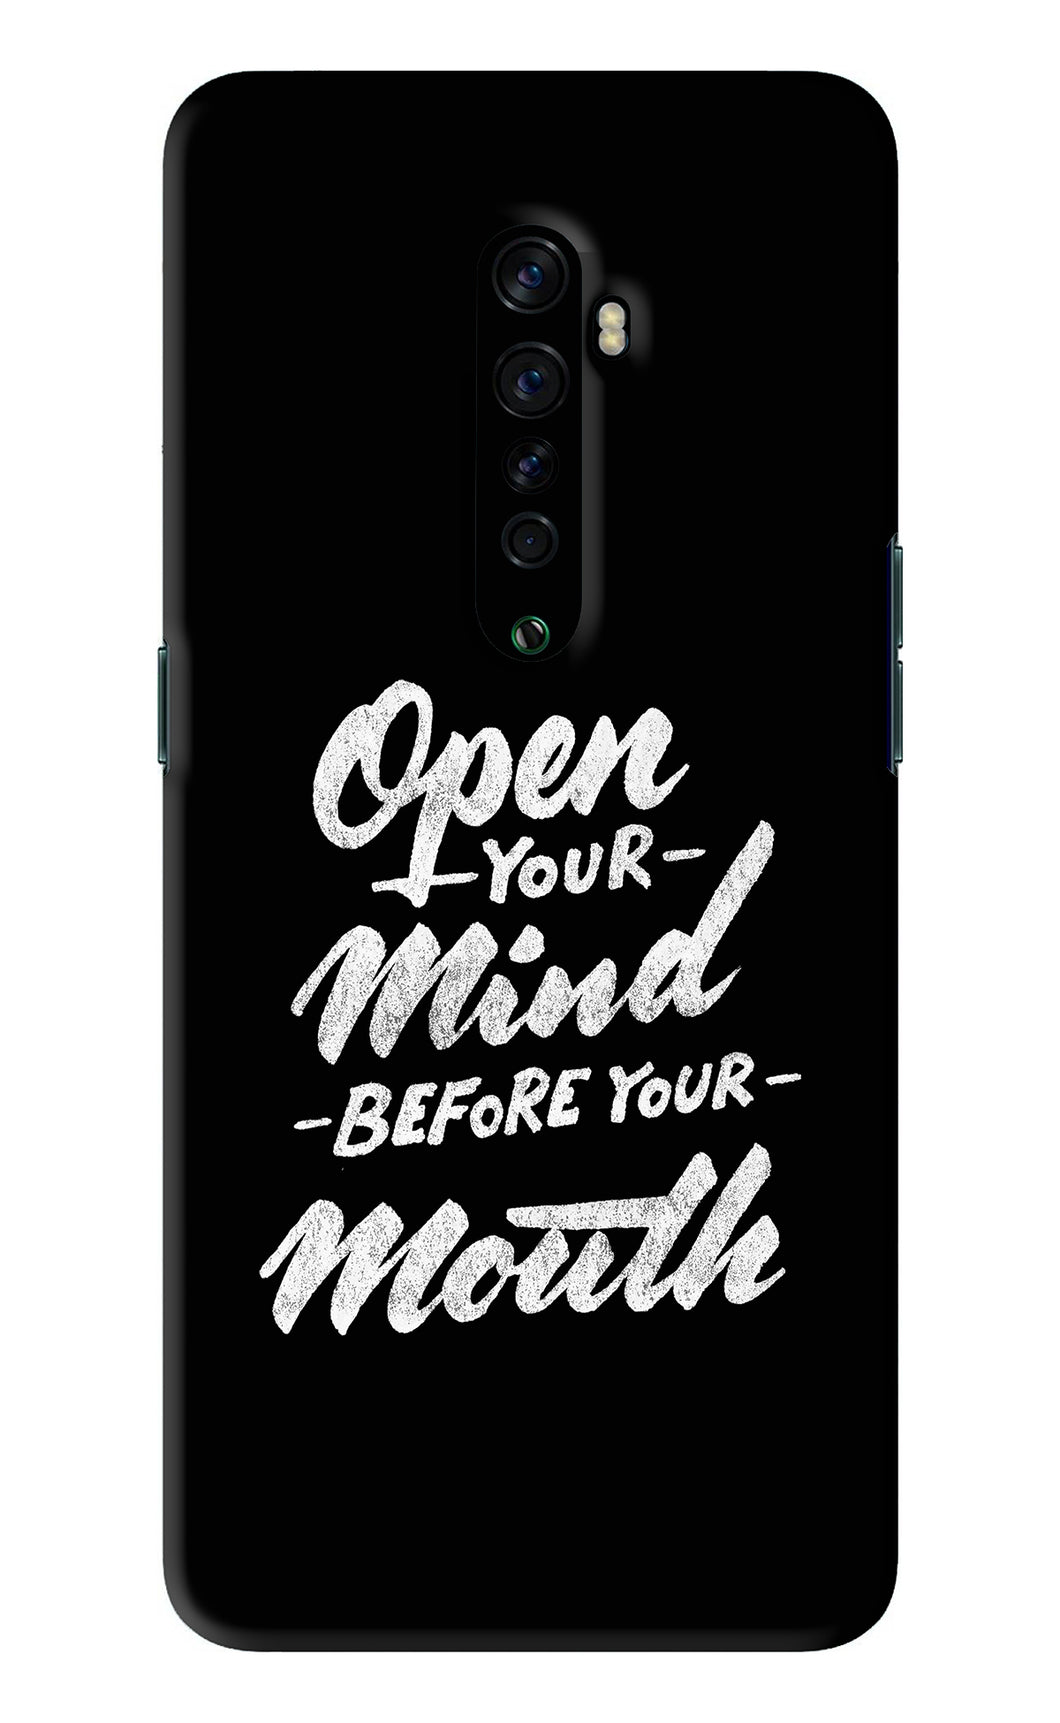 Open Your Mind Before Your Mouth Oppo Reno 2 Back Skin Wrap